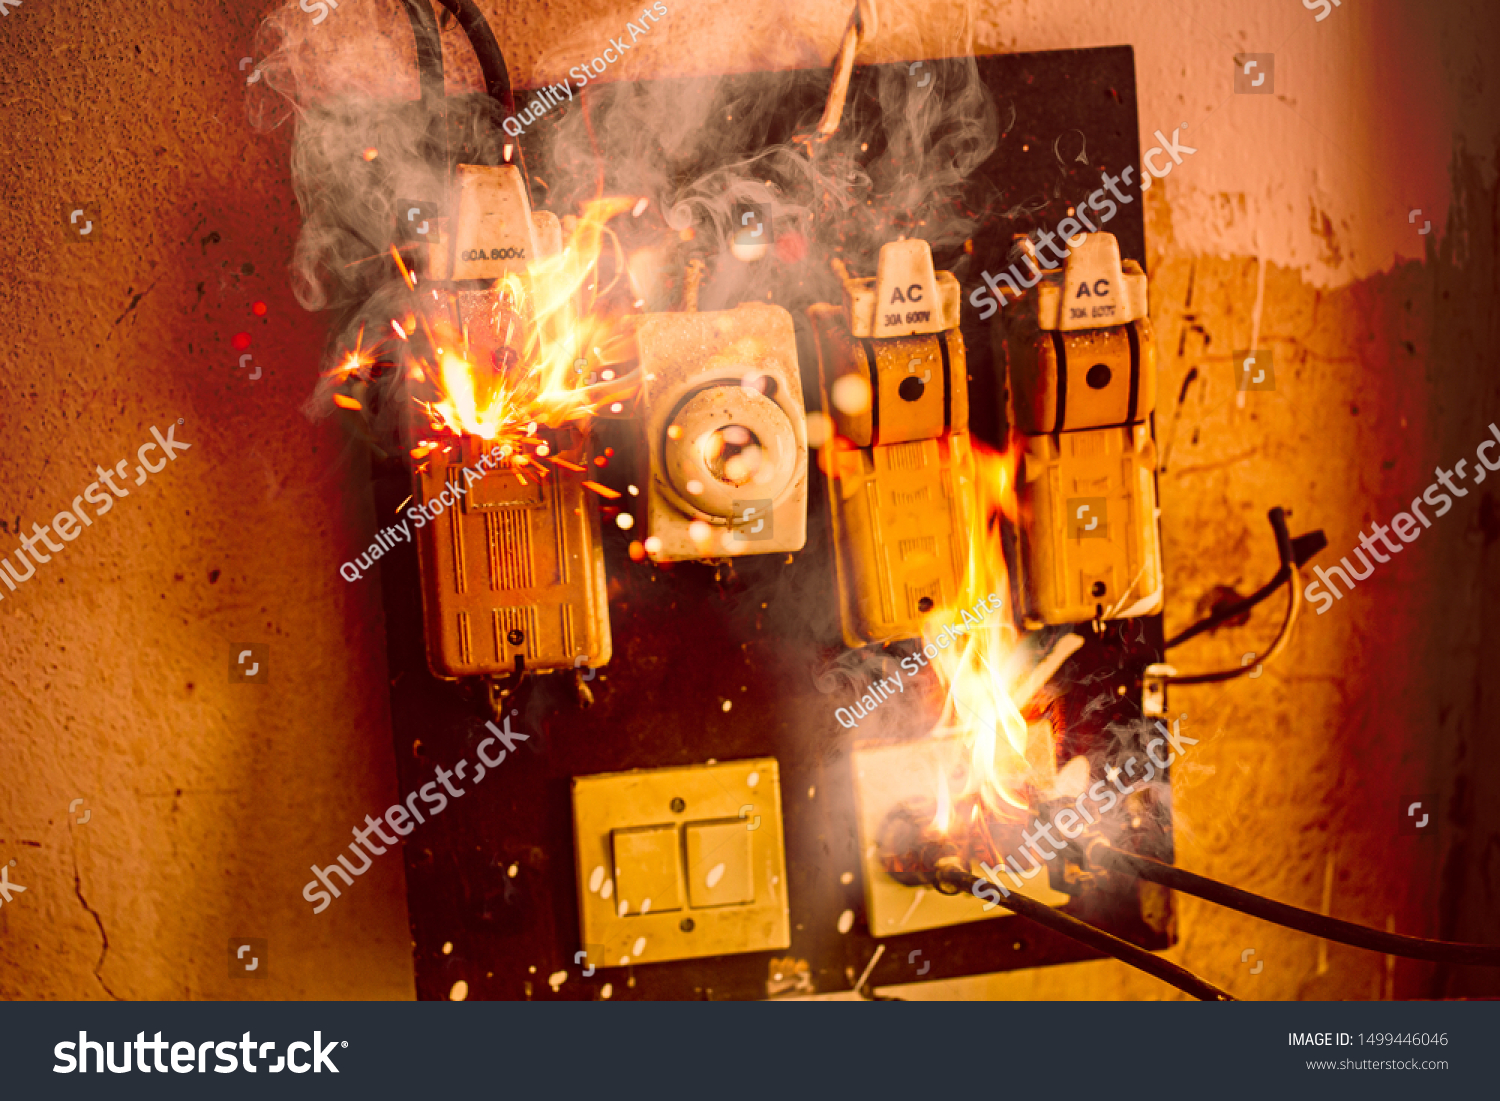 Blown short circuit electricity breaker,  fuse box damaged from high voltage overload, old bad installation condition over heat fuses home danger from fire burn #1499446046